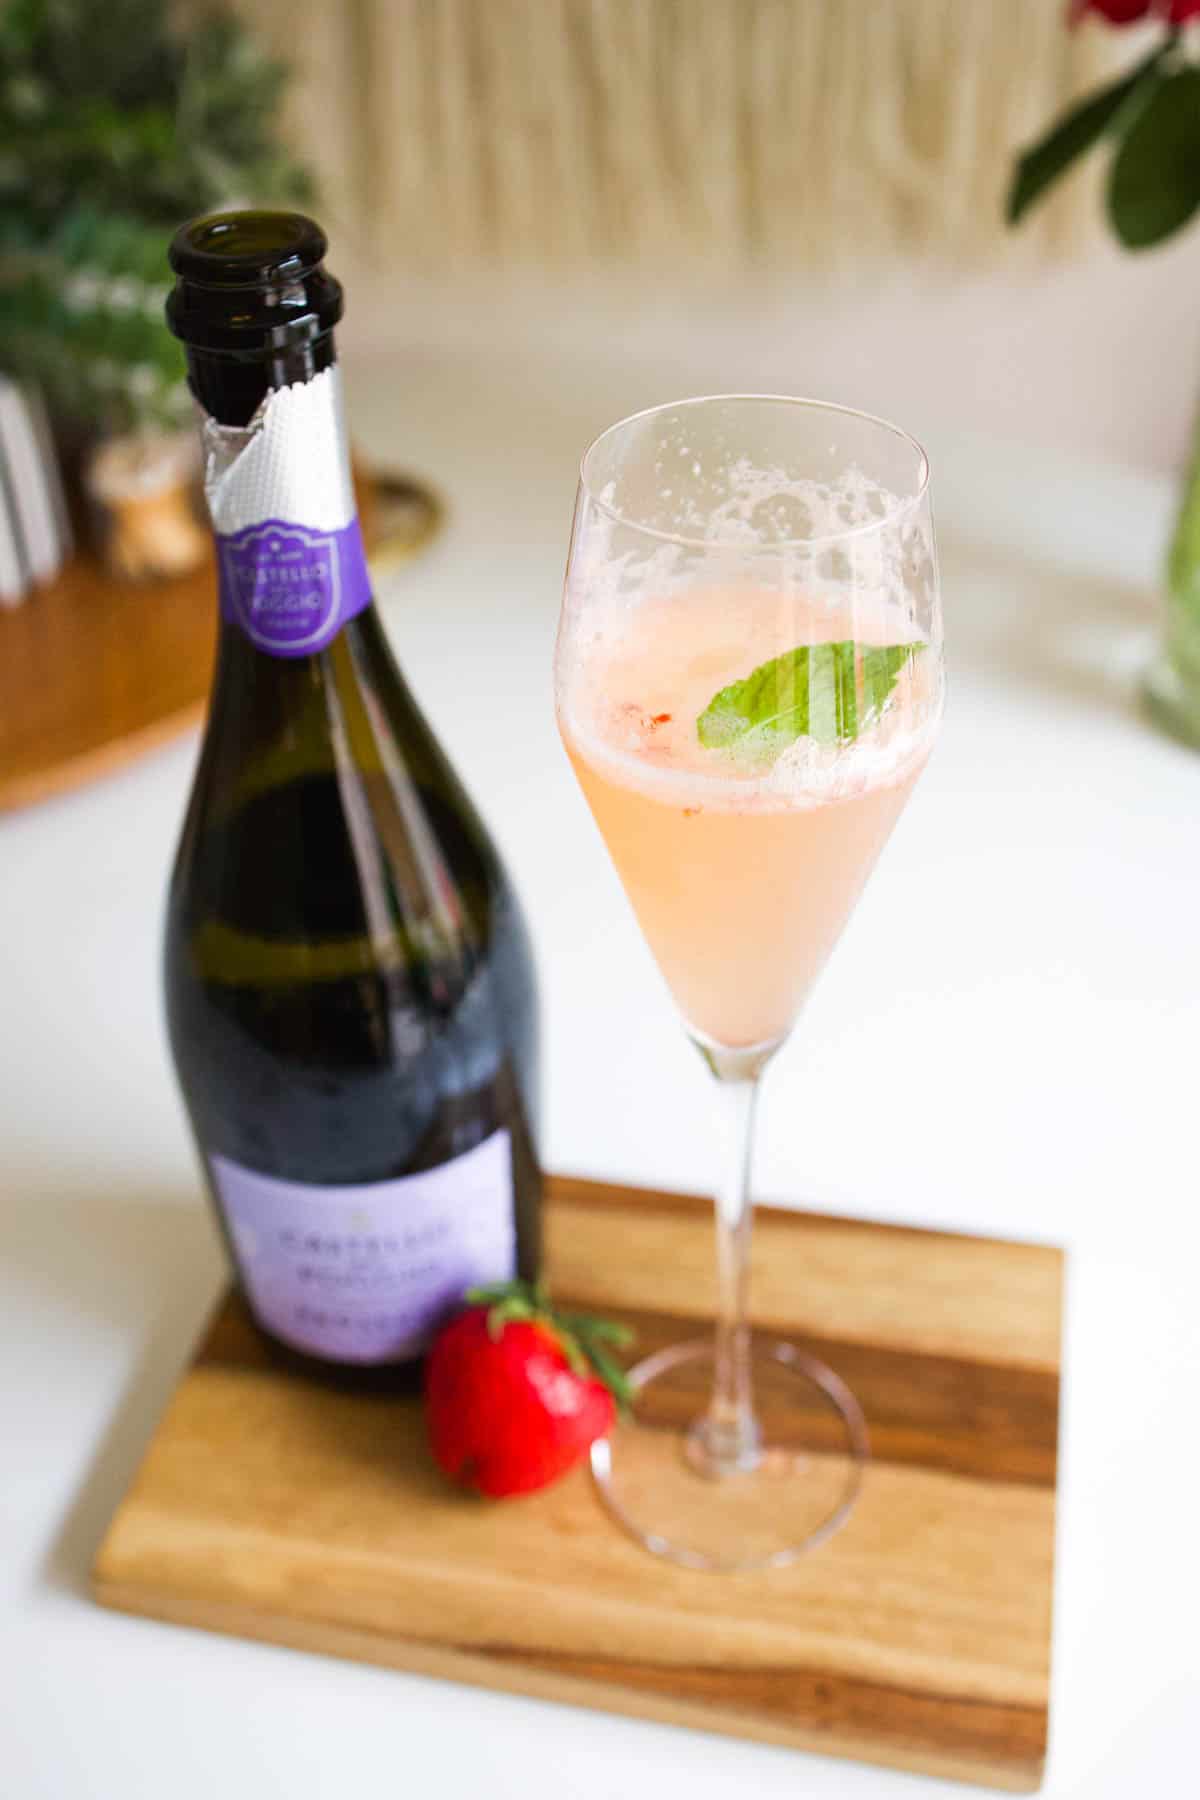 A champagne flute on a wooden board with a cocktail in it next to a strawberry and bottle of prosecco.